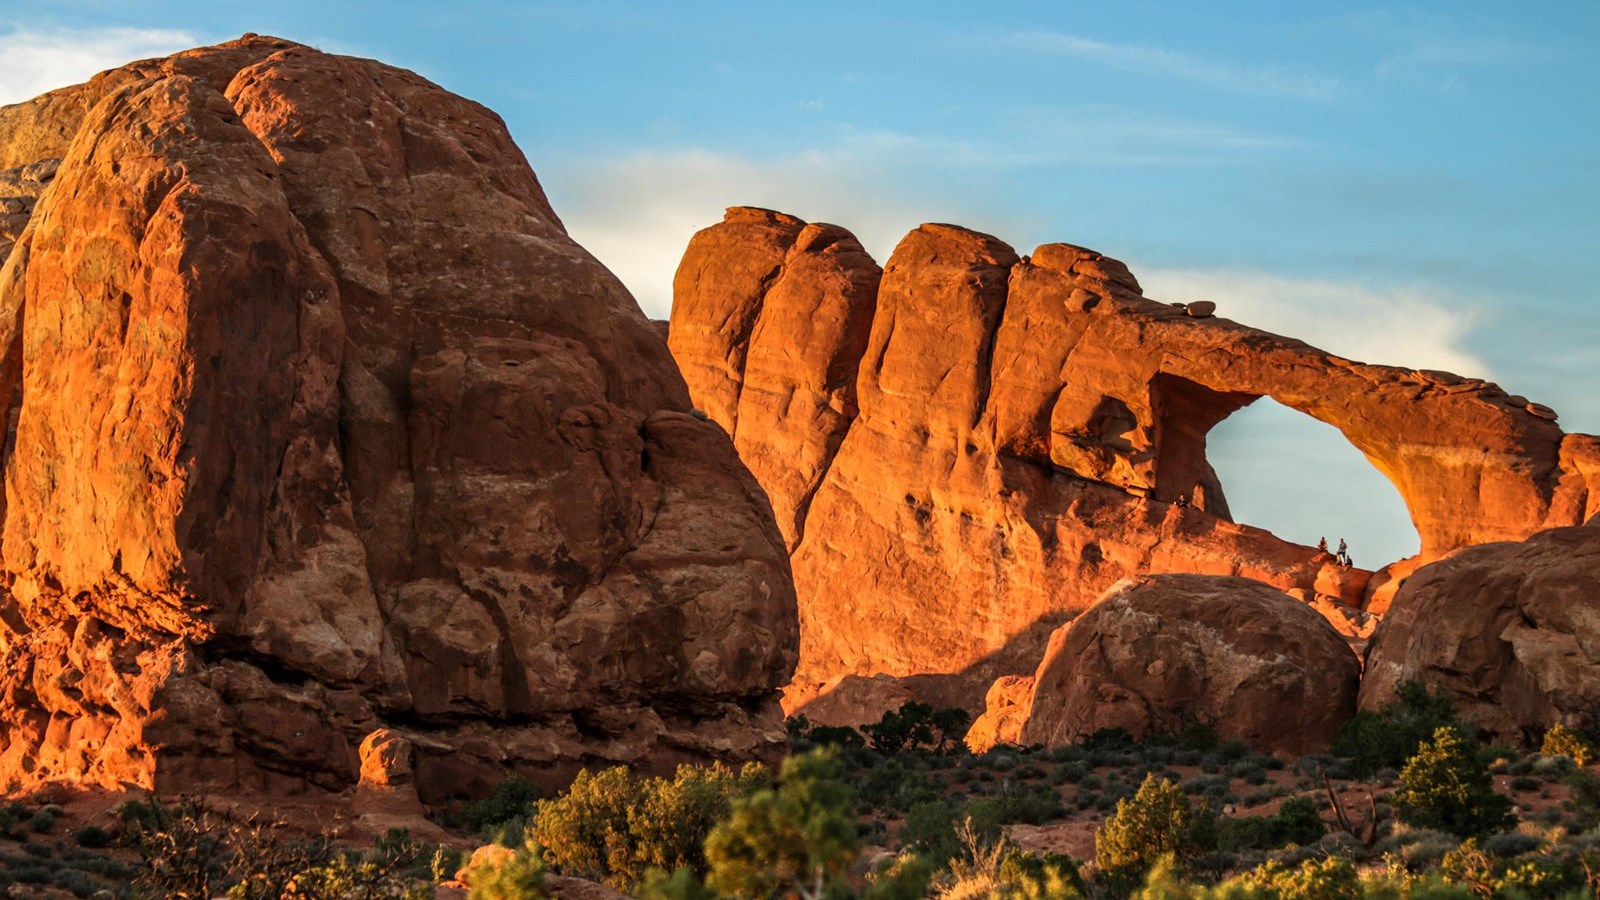 A large sandstone arch is visible at sunset